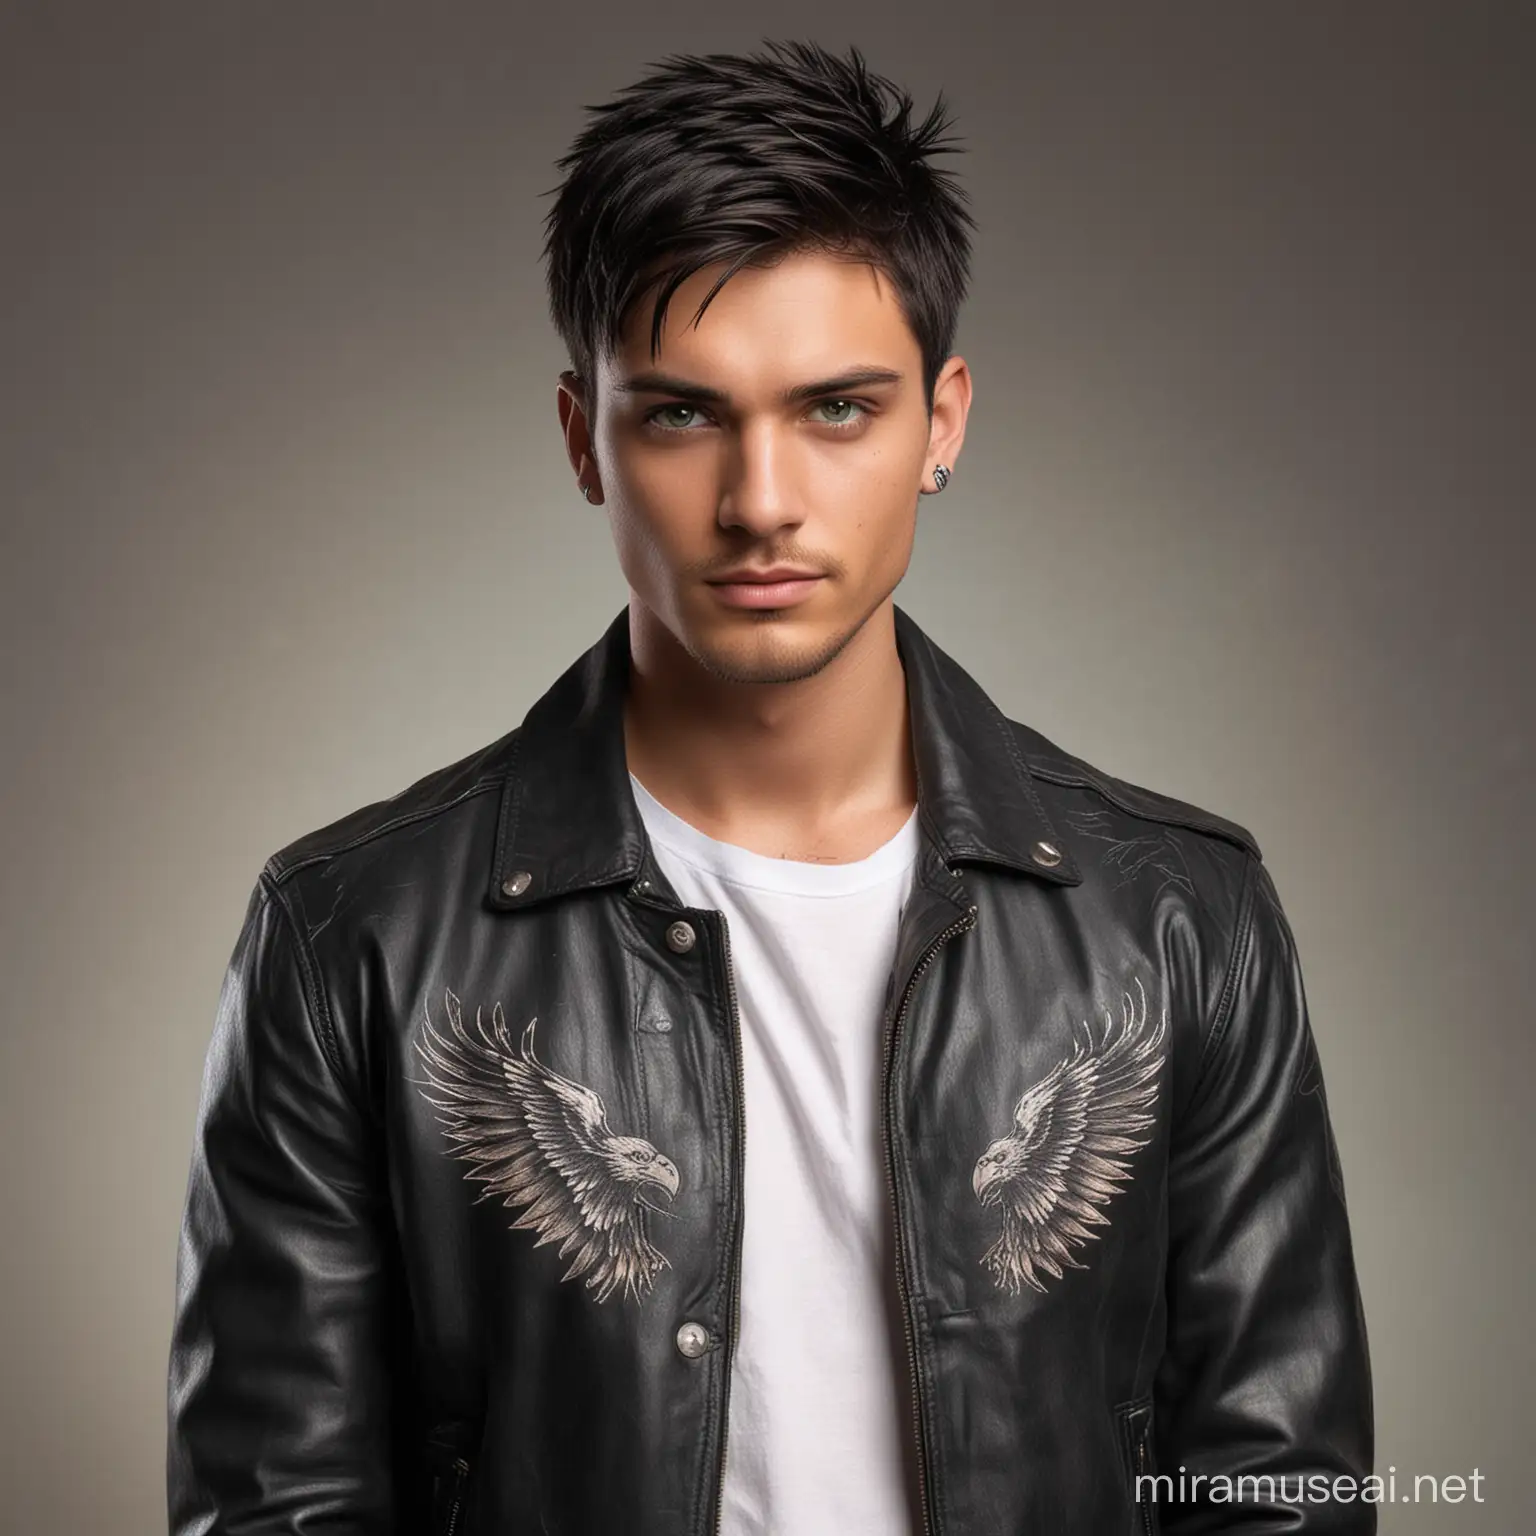 Confident Young Man with Black Hair Green Eyes Leather Jacket and Tattoo